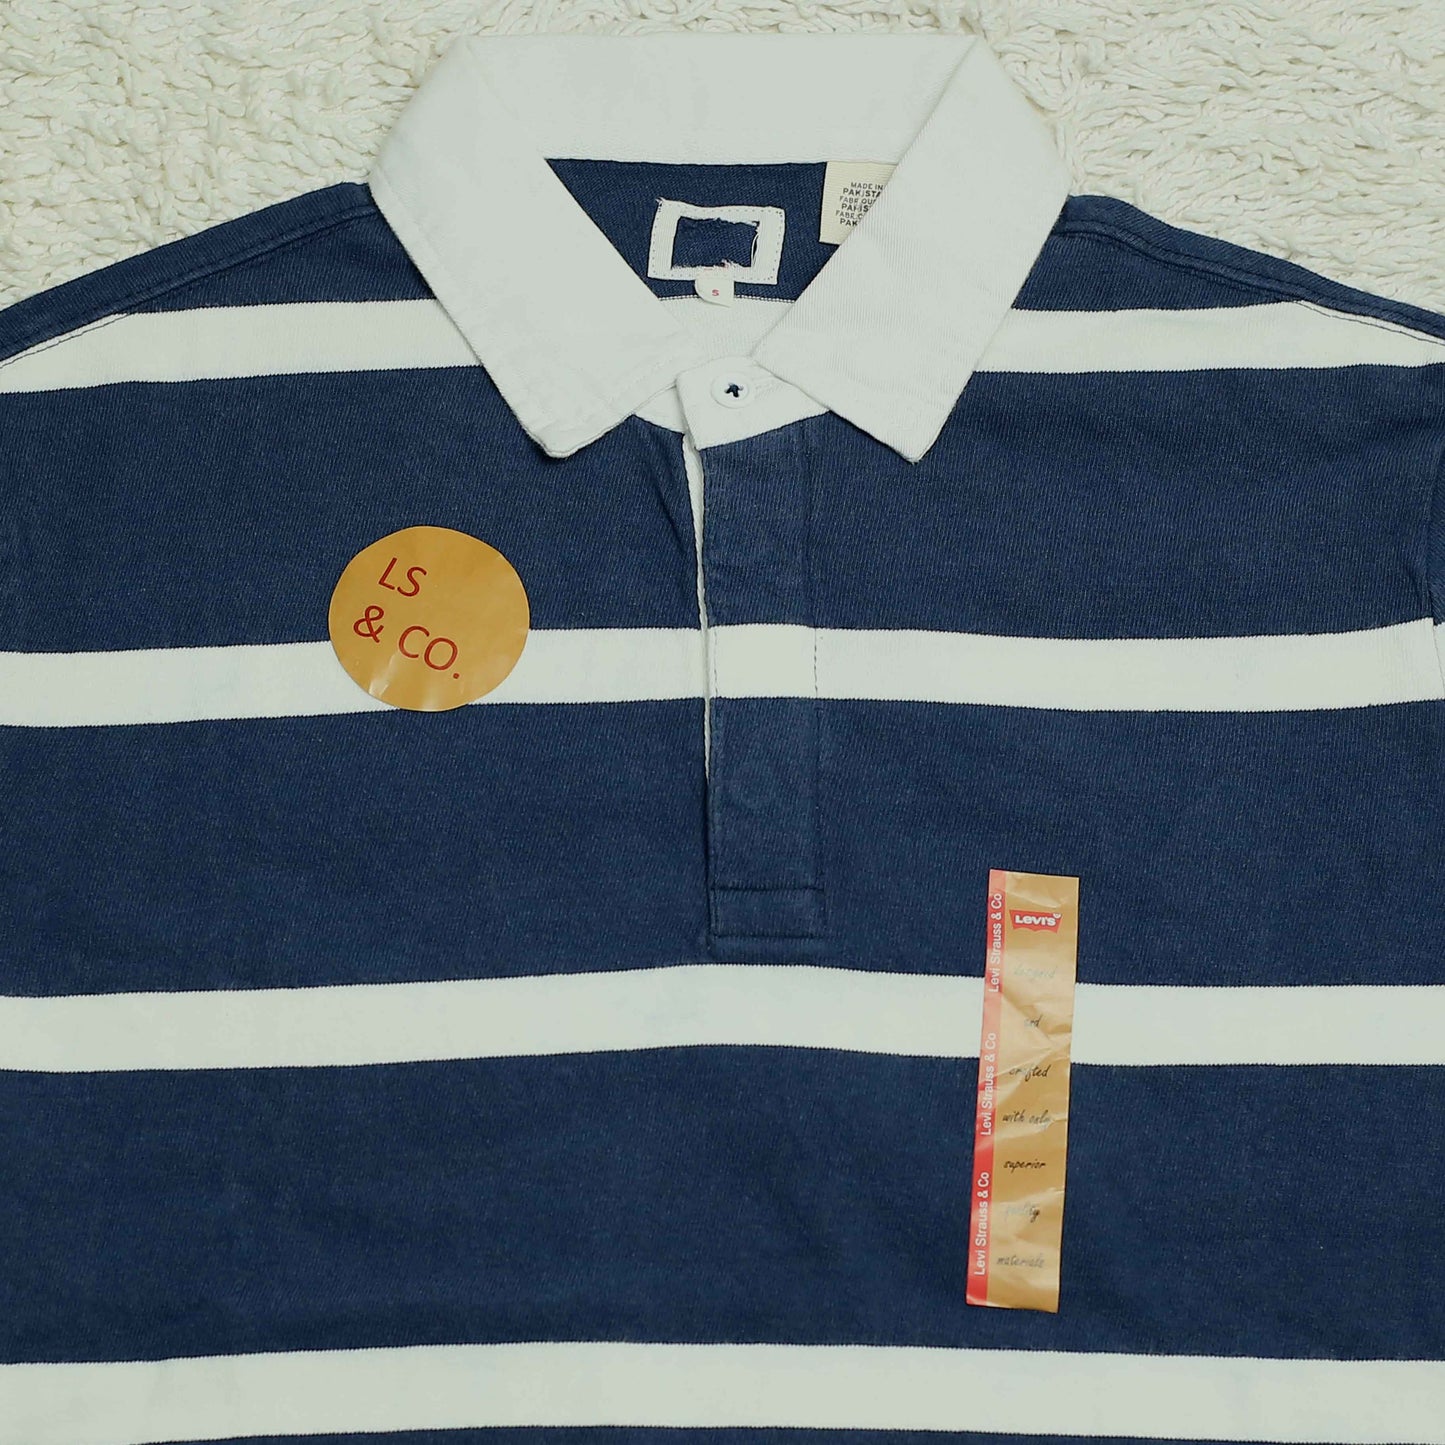 Lv - Polo (Men) T Shirt Navy Blue Thick Stripes With White Collar